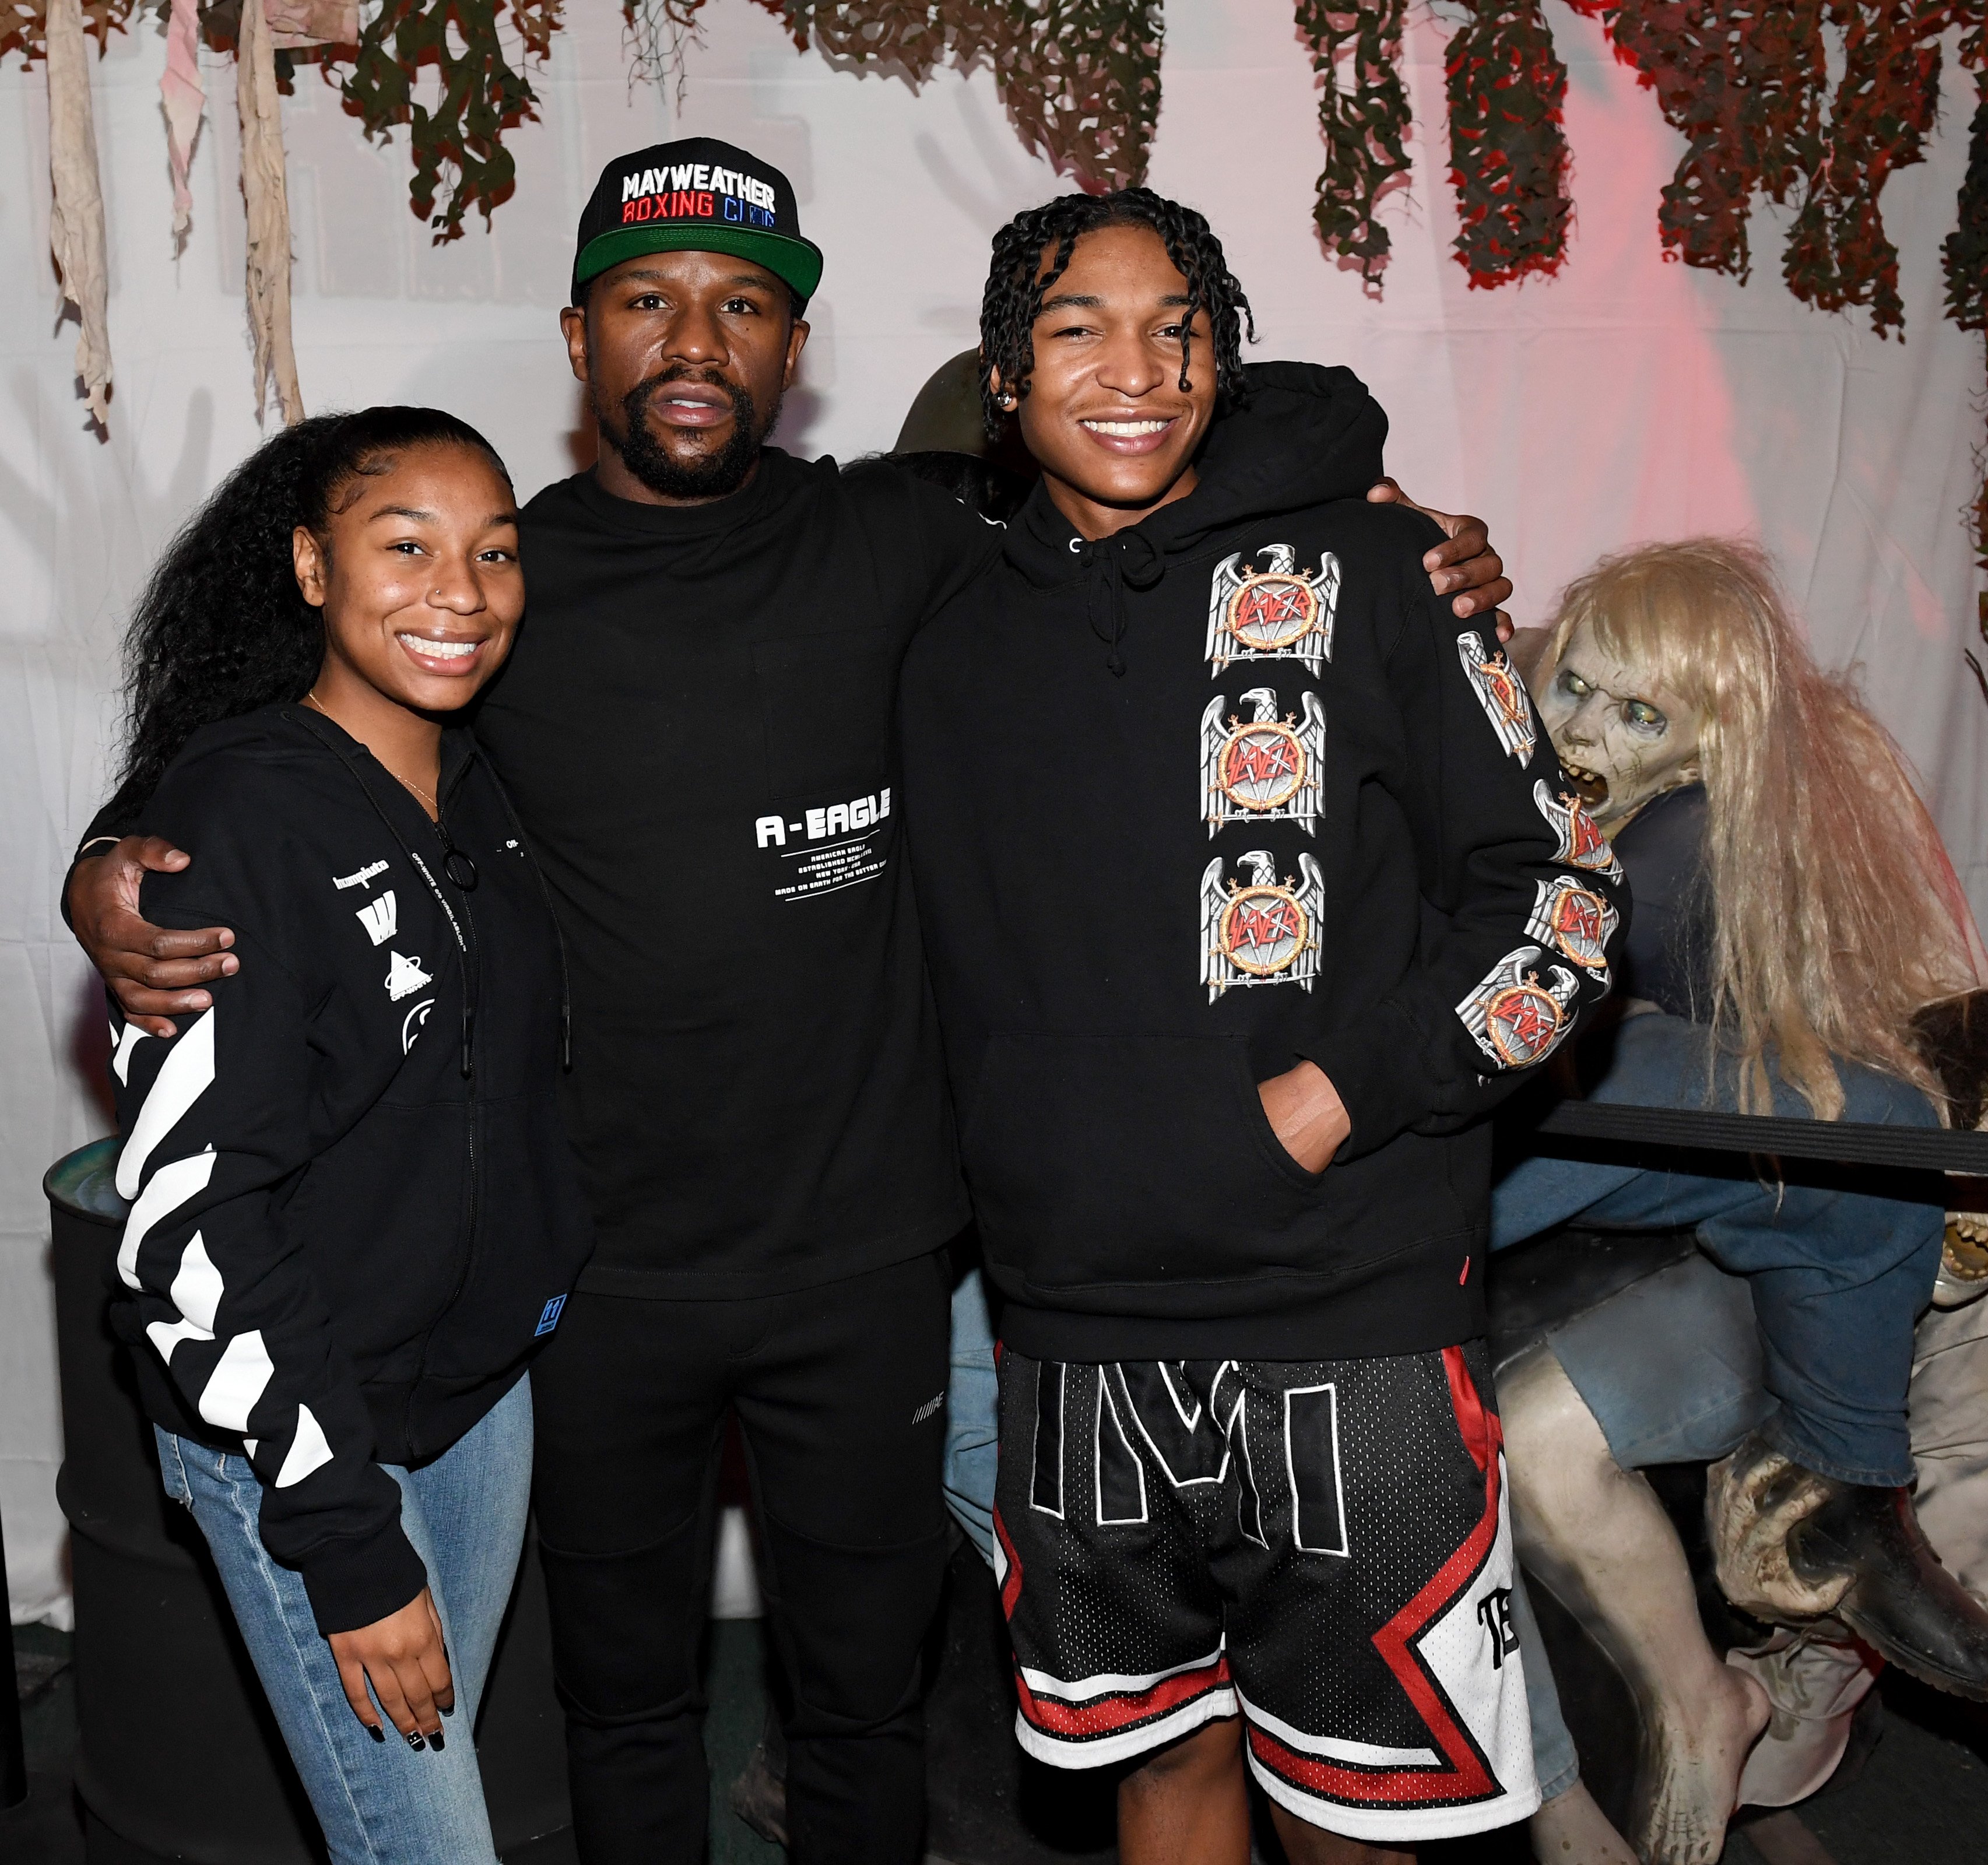 Jirah Mayweather, father Floyd Mayweather Jr., and his son "King" Koraun Mayweather at the Fright Ride haunted attraction in 2020 in Las Vegas. | Source: Getty Images